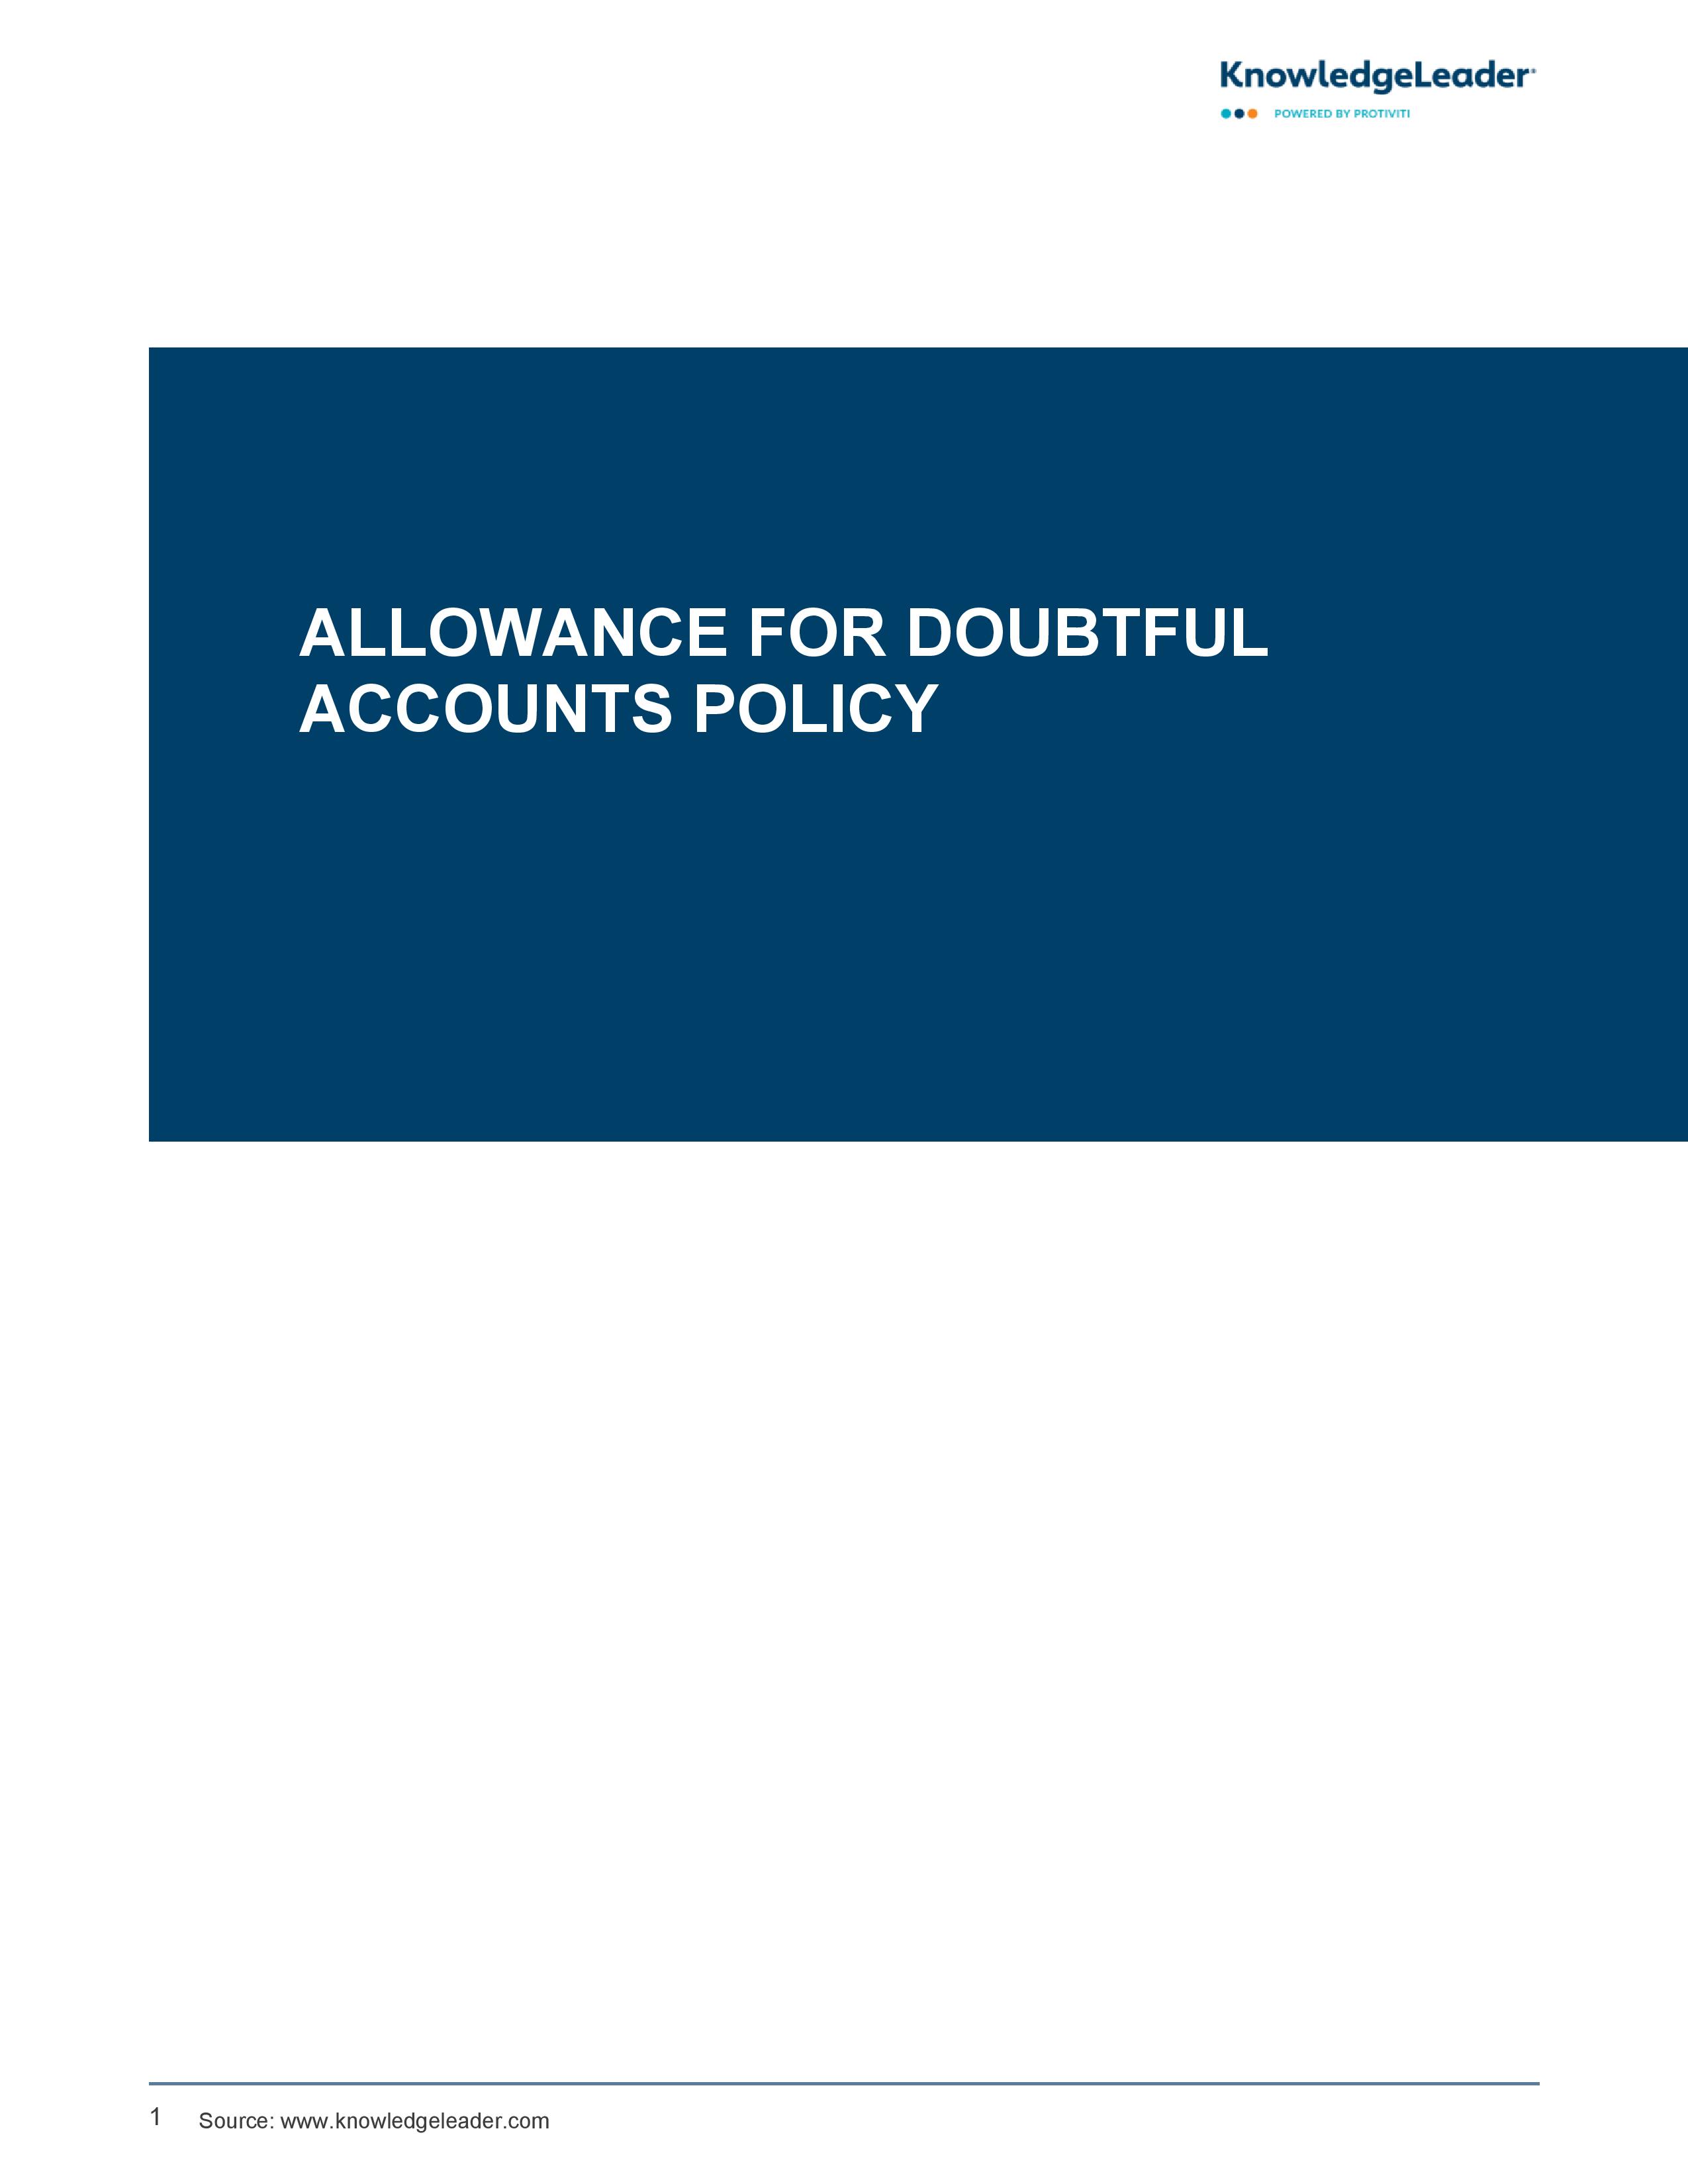 screenshot of the first page of Allowance for Doubtful Accounts Policy